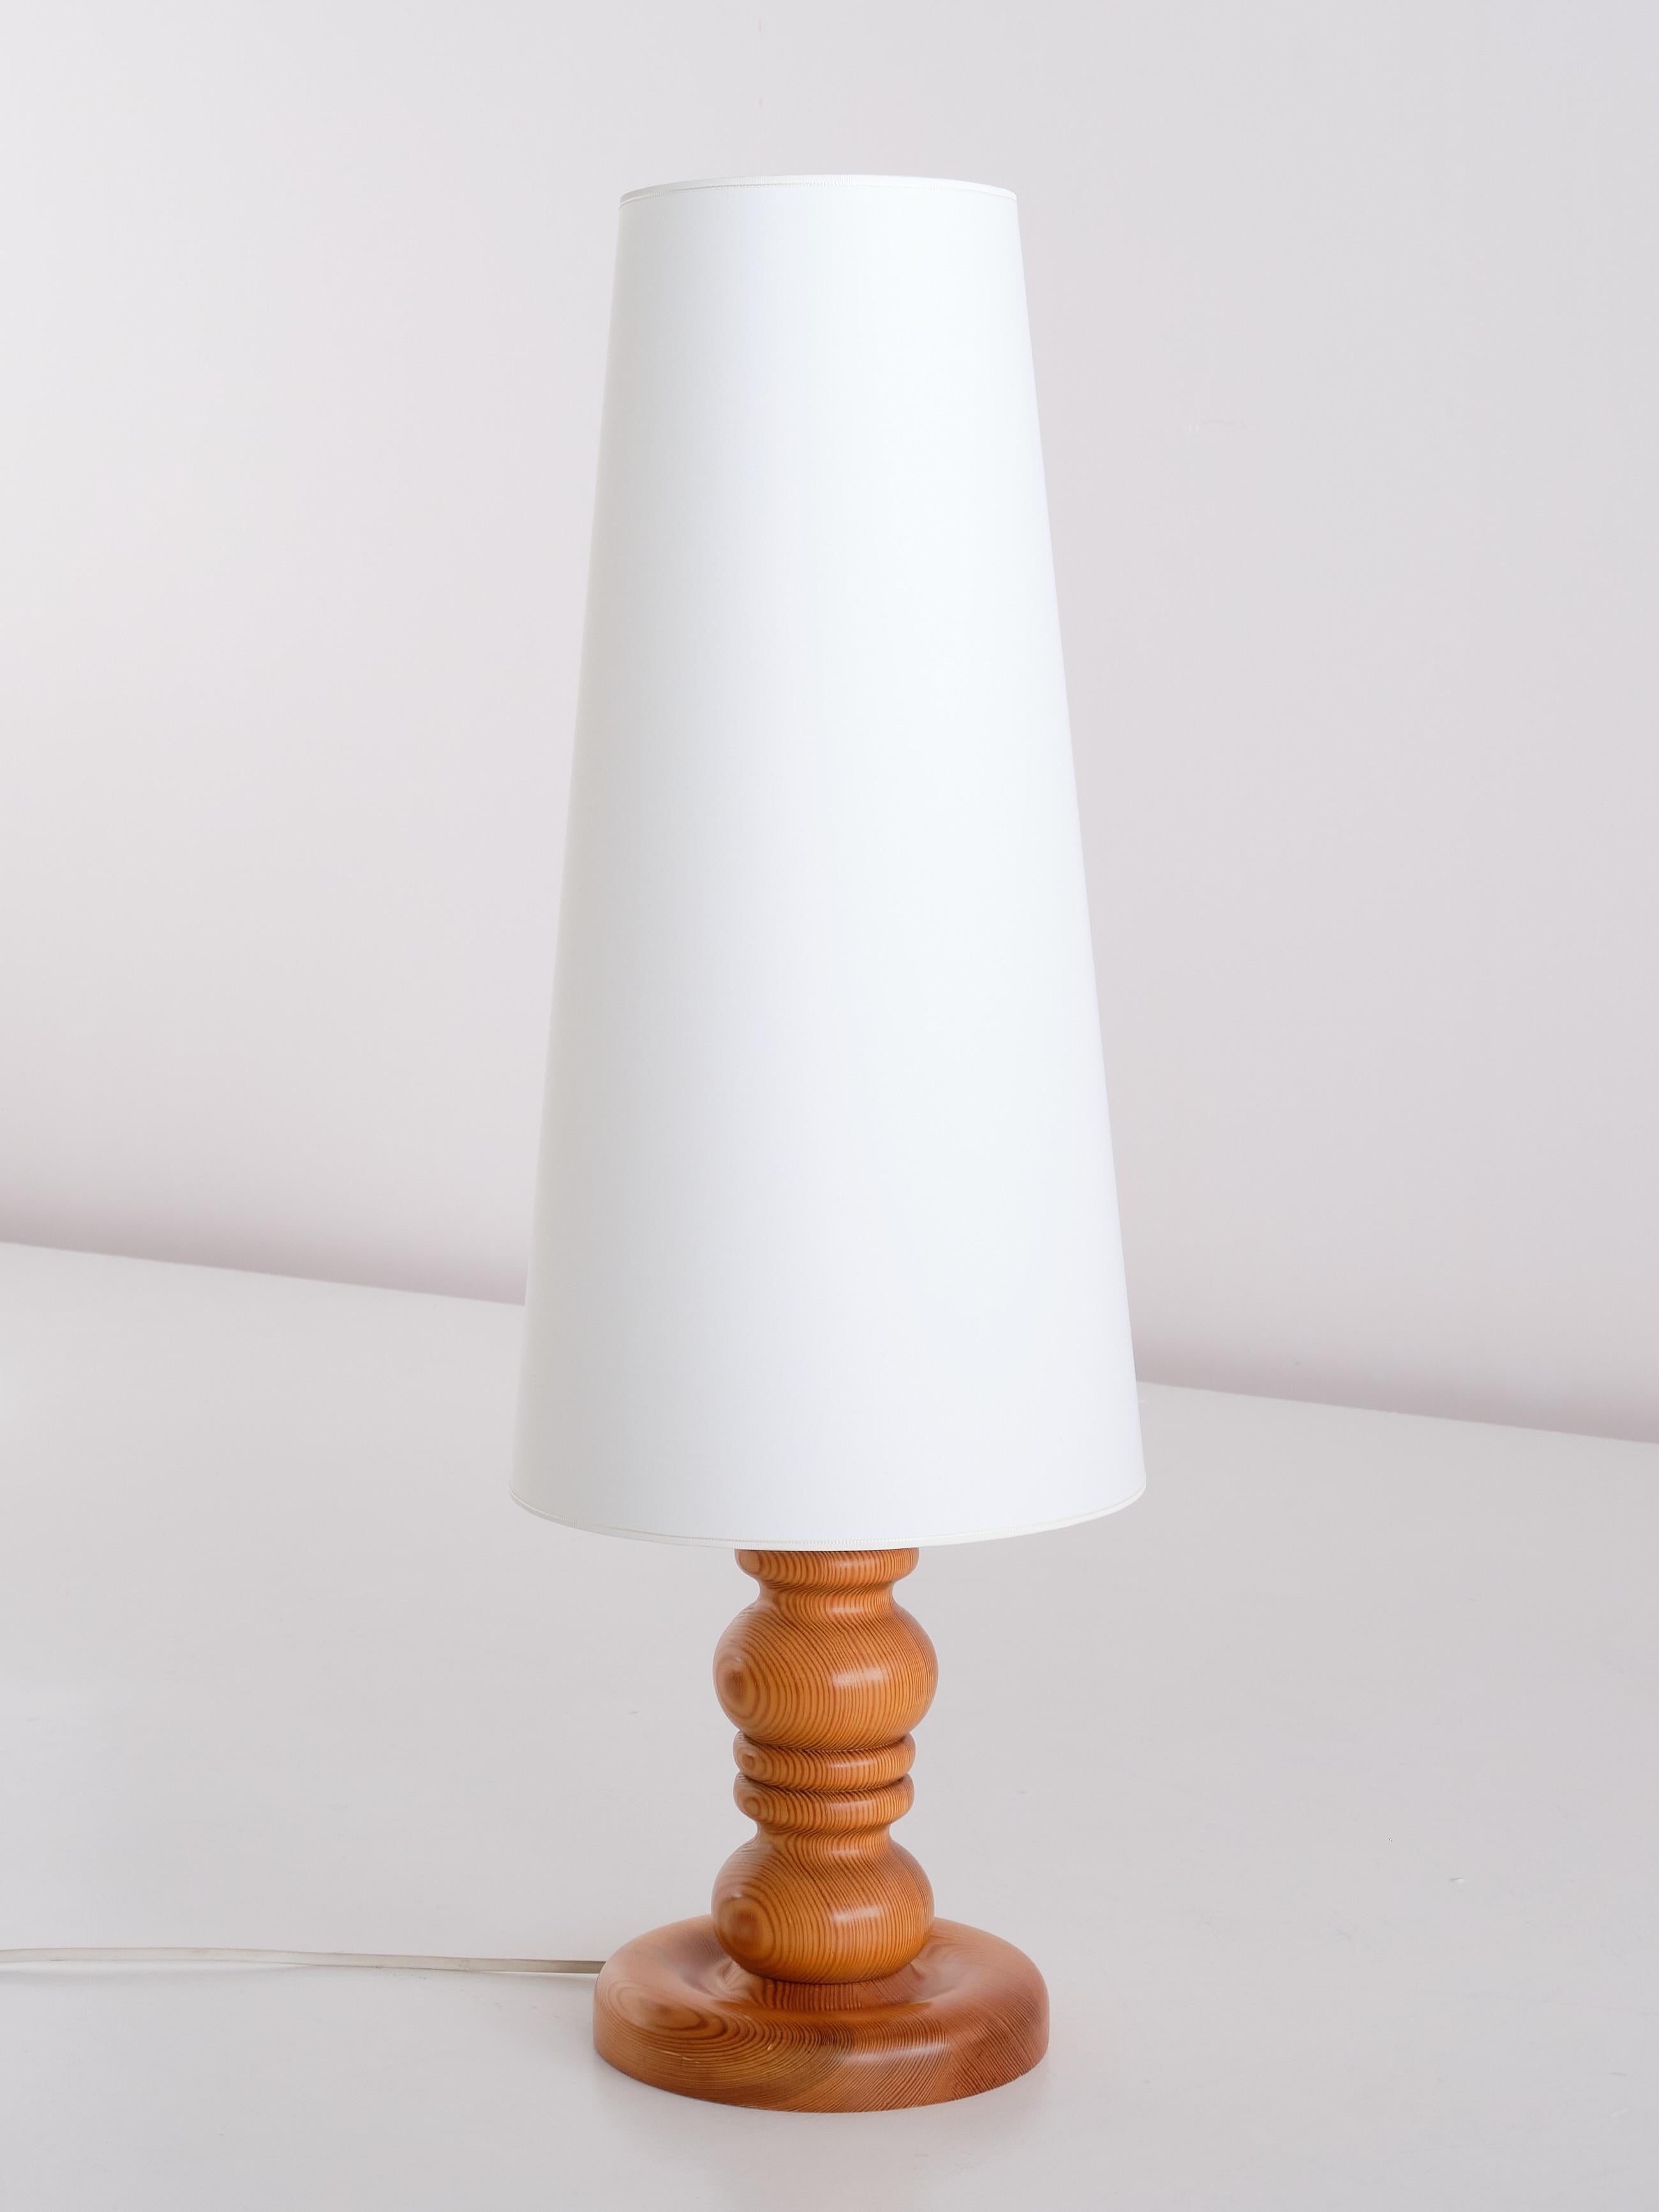 This table lamp was produced by Markslöjd in Kinna, Sweden, in the early 1970s. The base is in solid pine with a beautiful wood grain. The tall, cone shaped shade gives the design a striking appearance. The custom shade is newly made in an ivory